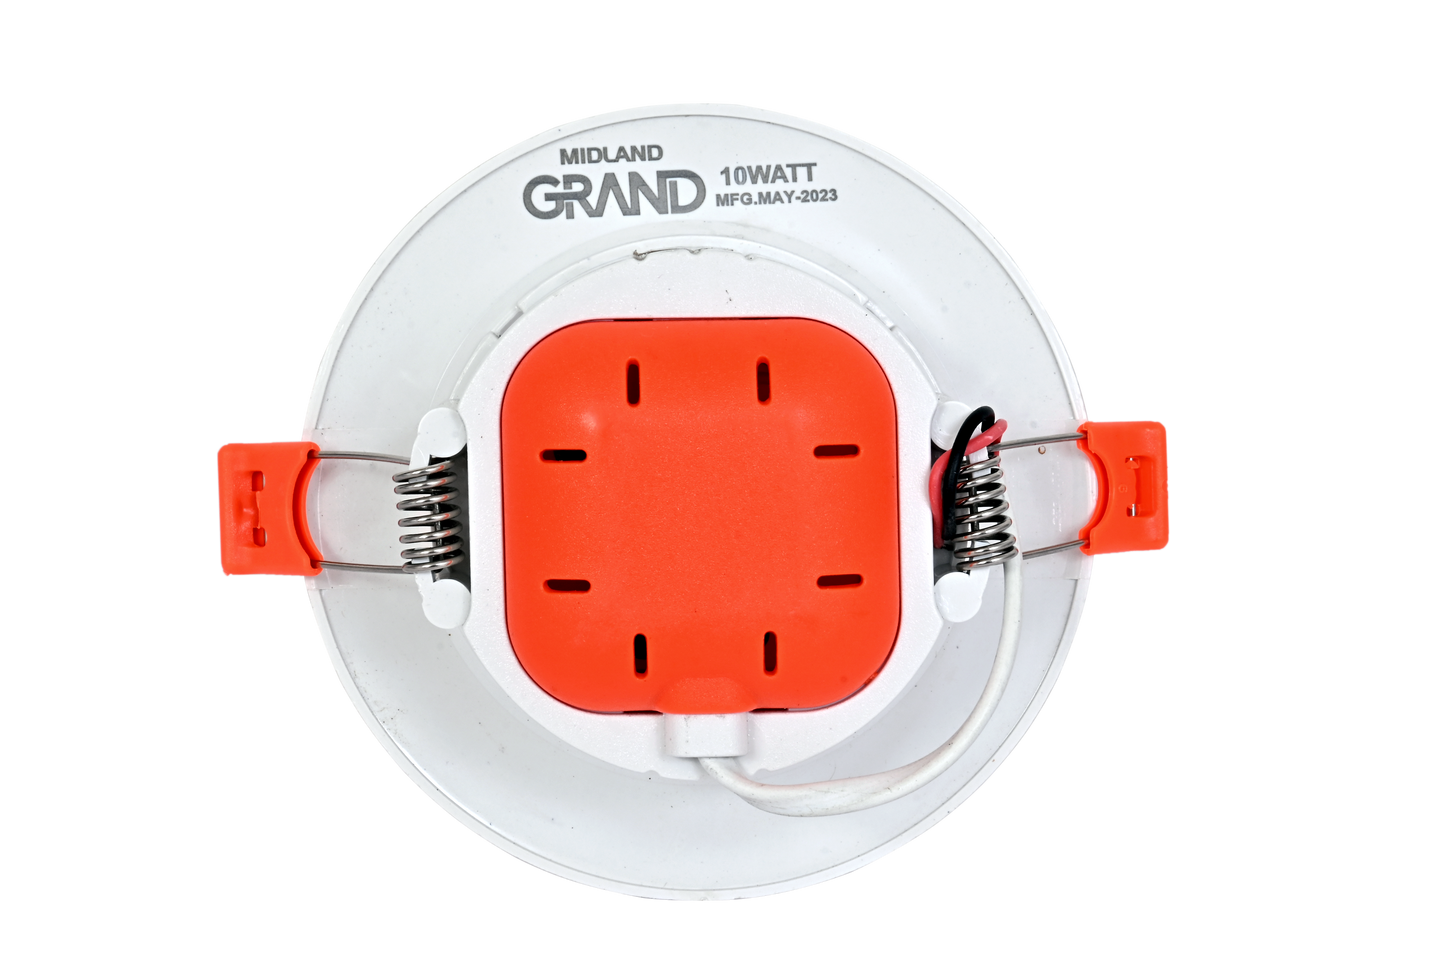 MIDLAND 10W GRAND 3 IN 1 LED CONCEALED BOX LIGHT